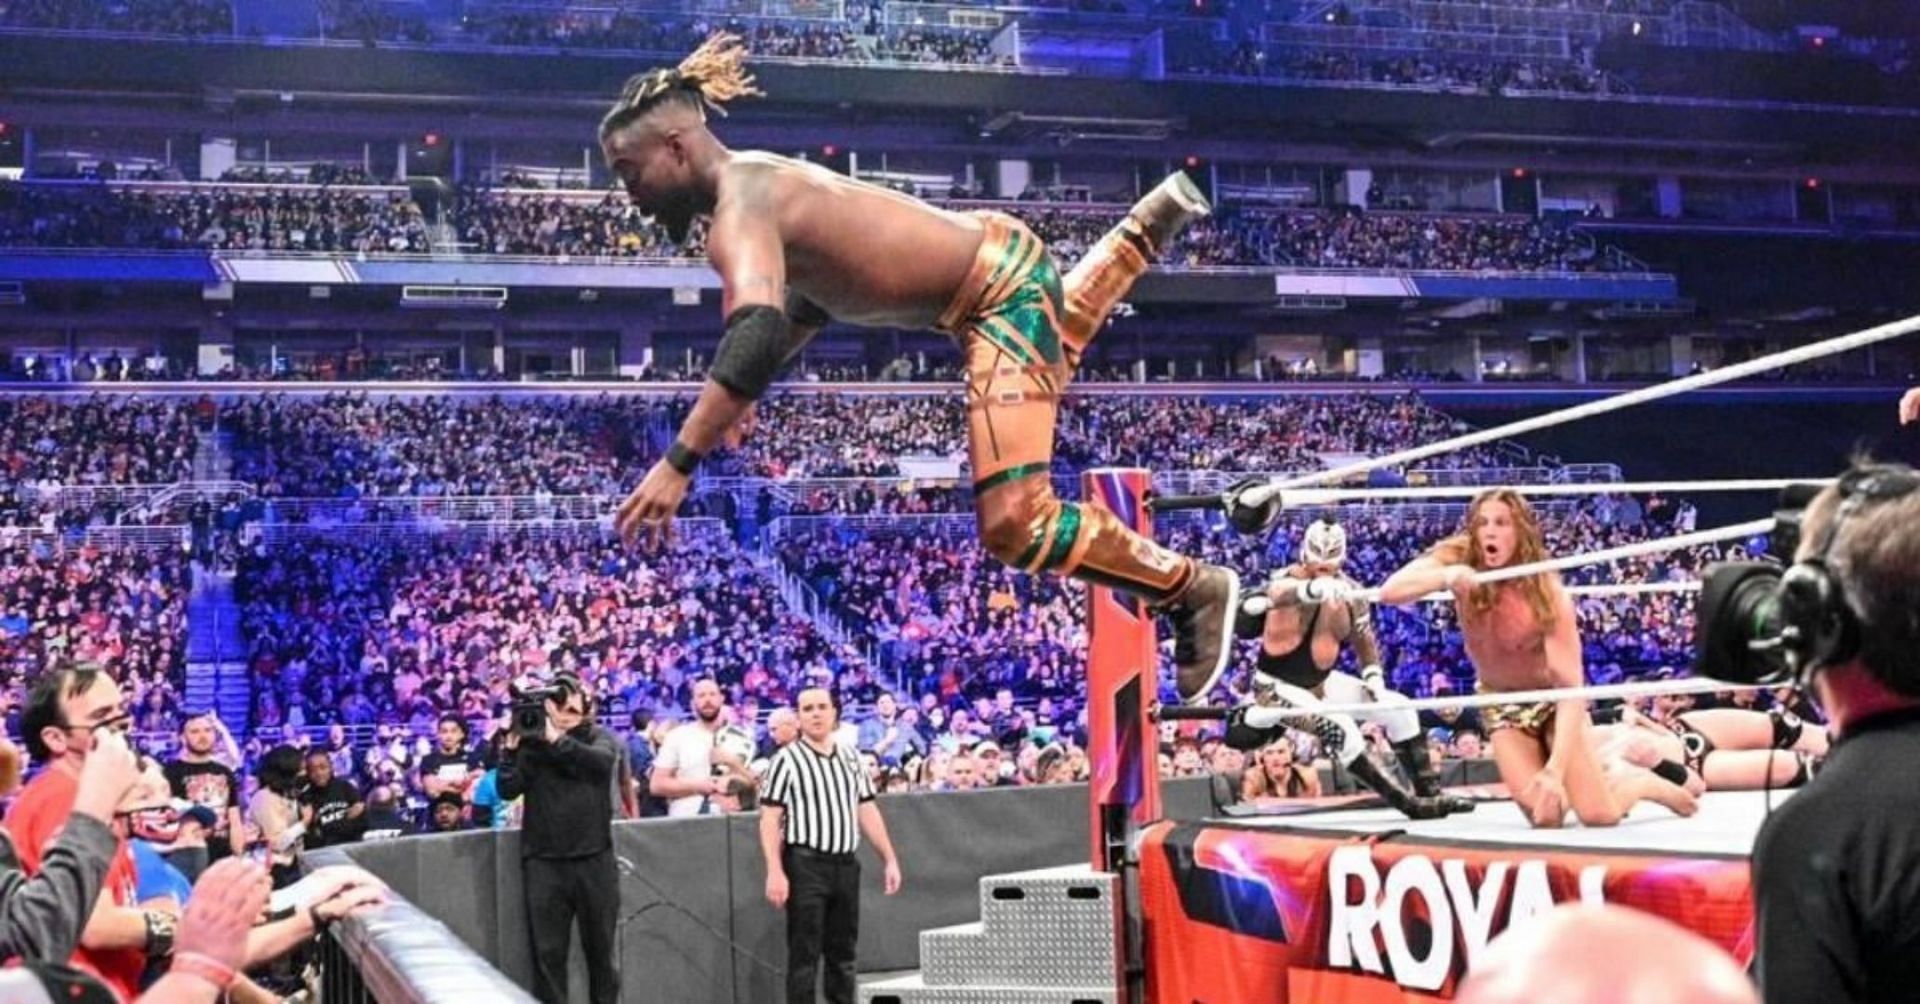 Kofi Kingston is known for his Royal Rumble efforts